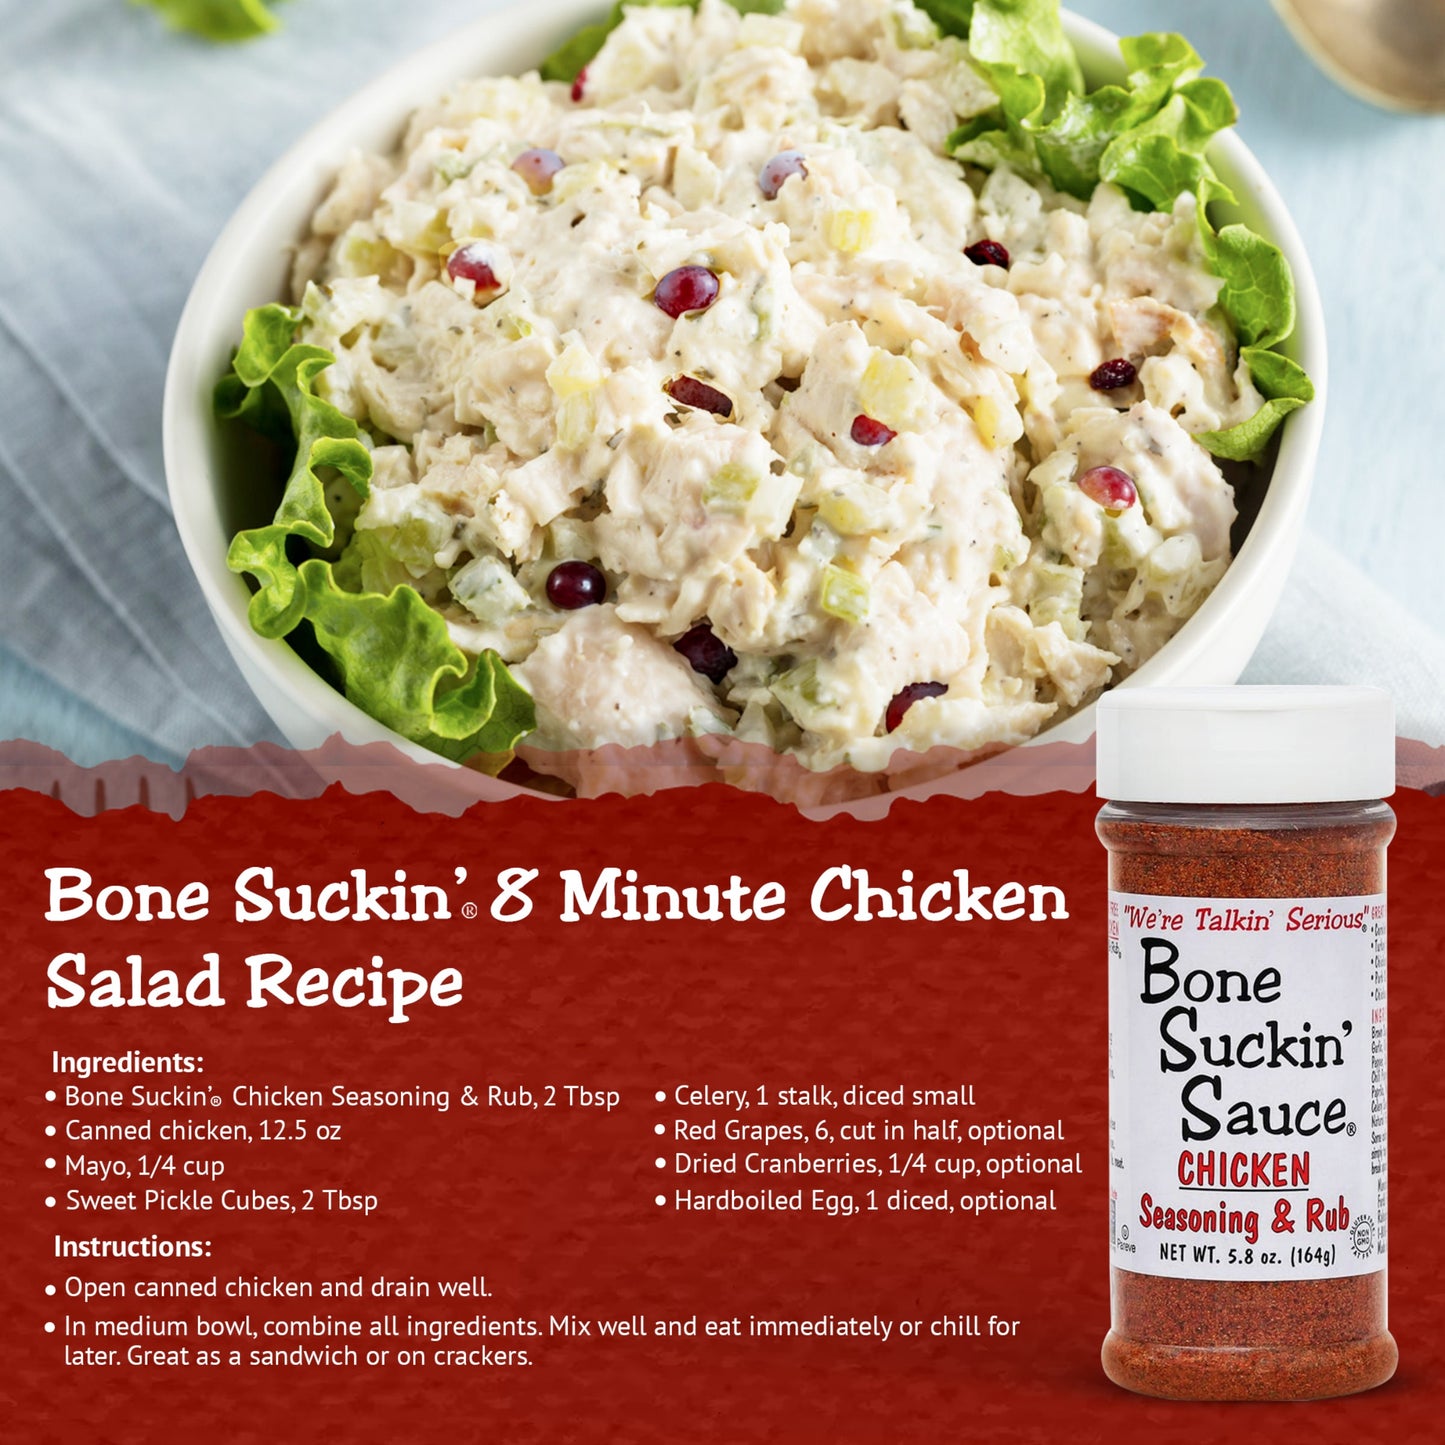 Bone Suckin 8 Minute Chicken Salad Recipe. Ingredients: Bone Suckin Chicken Seasoning, 2 tbsp. Canned chicken, 12.5 oz. Mayo, 1/4 cup. Sweet pickle cubes, 2 tbsp, celery, 1 stalk, diced small, red grapes, 6 cut in half, optional. Dried cranberries, 1/4 cup, optional. Hardboiled egg, 1 diced, optional. Instructions: Open canned chicken and drain well. In medium bowl, combine all ingredients. Mix well and eat immediately or chill for later. Great as a sandwich or on crackers.